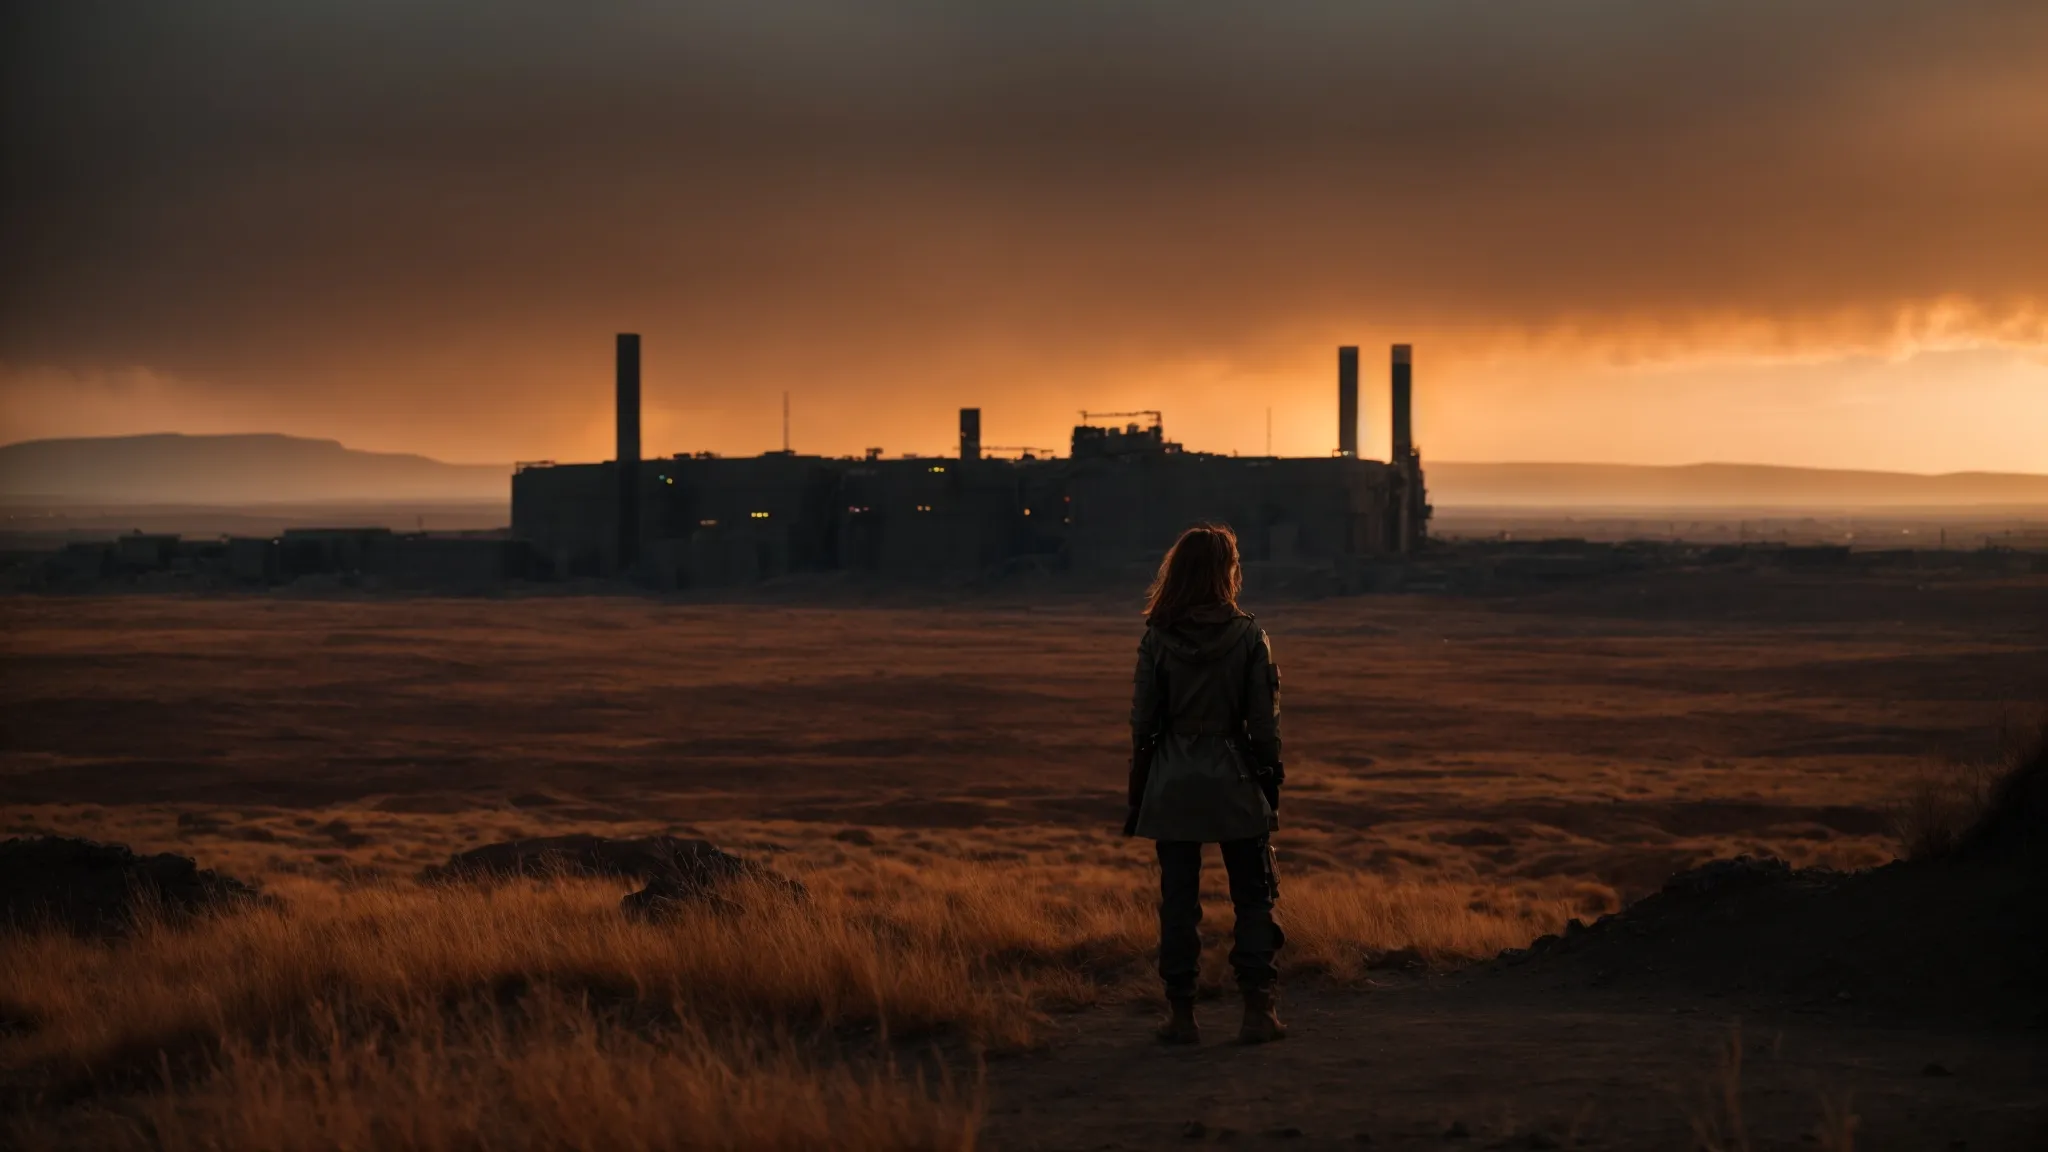 a silhouette of ella purnell's character stands at the edge of a desolate wasteland, gazing towards a distant, looming structure of the brotherhood of steel under an orange, post-apocalyptic sky.